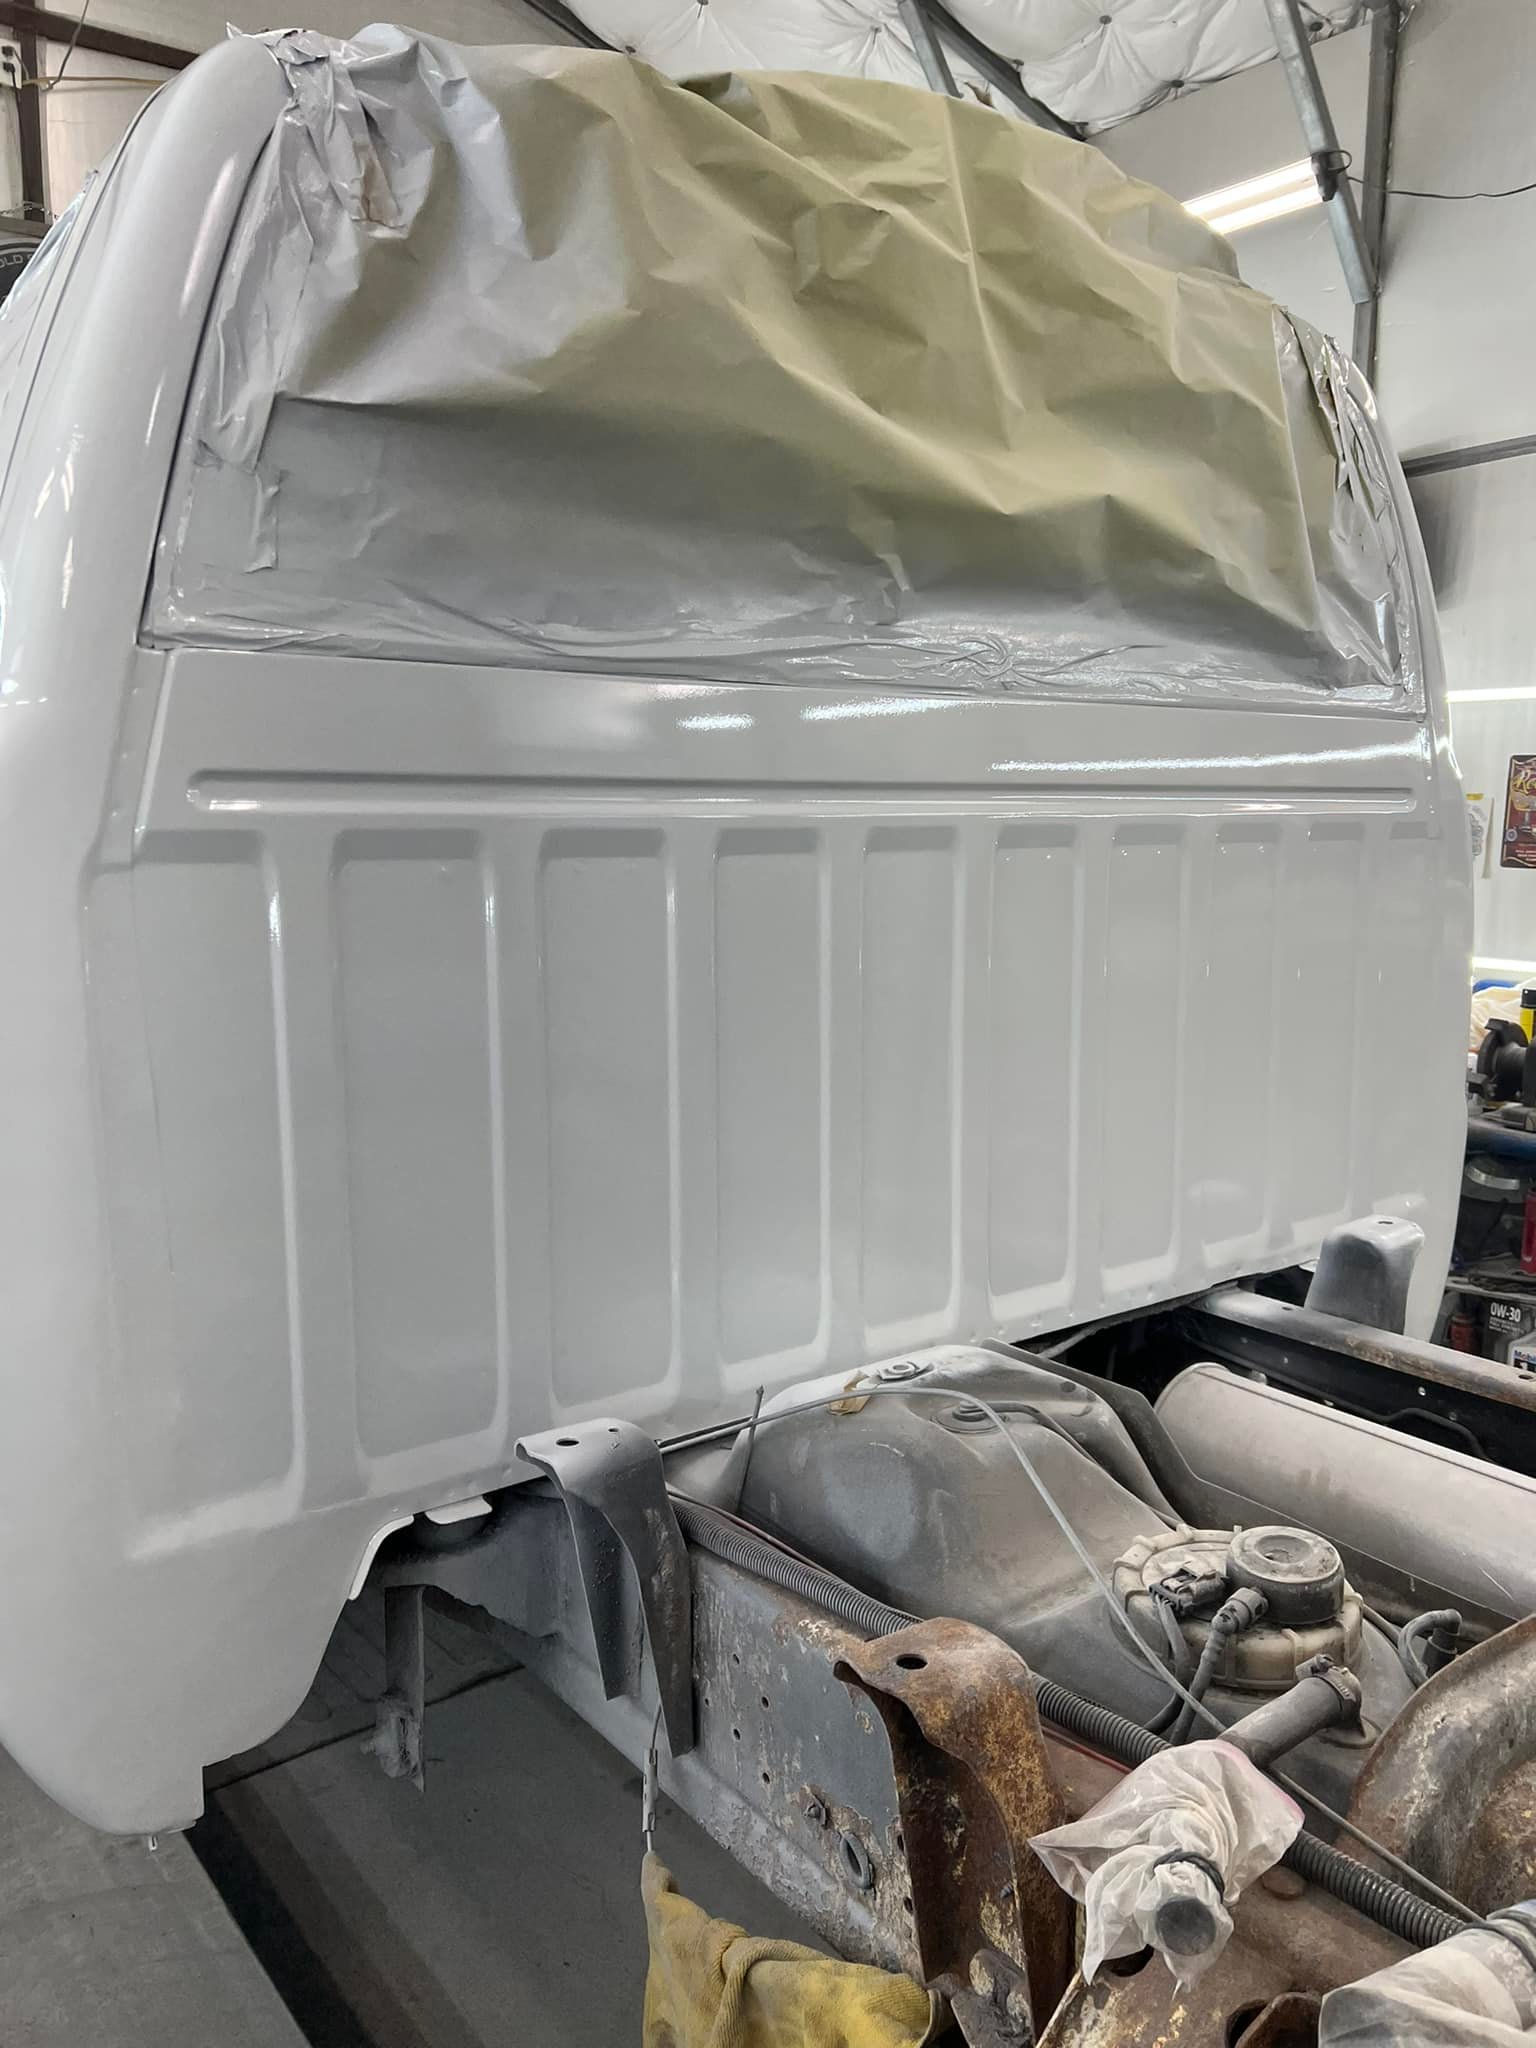 Truck in progress of getting paint and body work